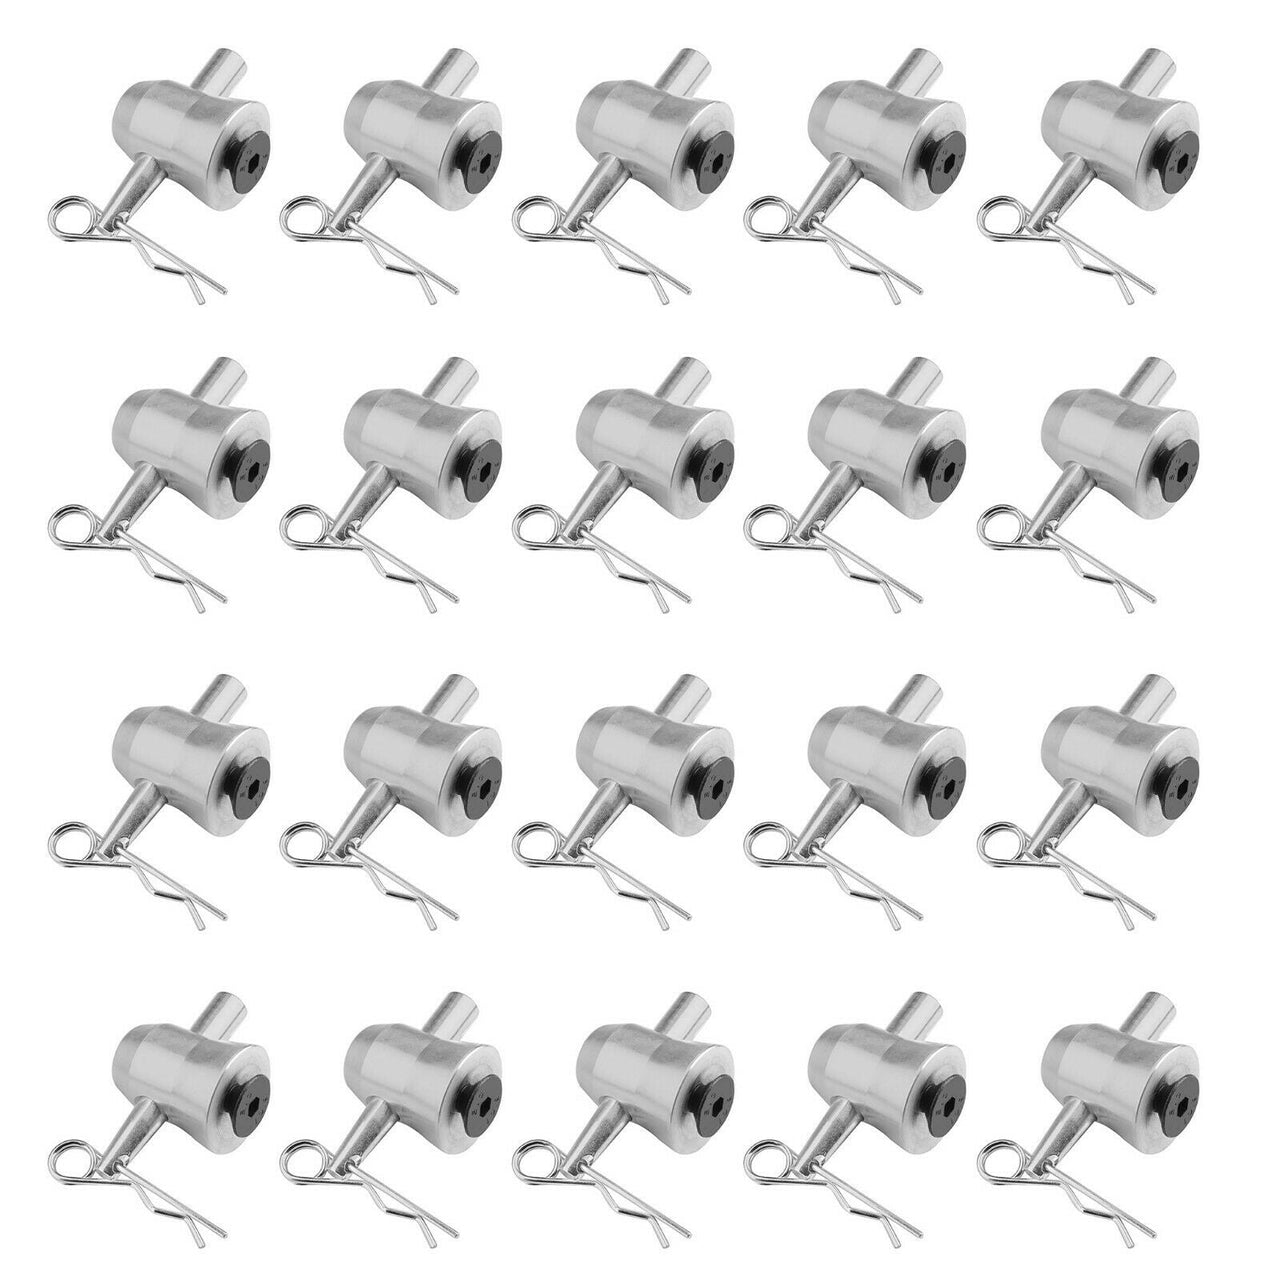 20 MR Truss THCC15PAK Half Conical Coupler for Truss DJ Stage Lighting w/ Body Safety Clips Pins